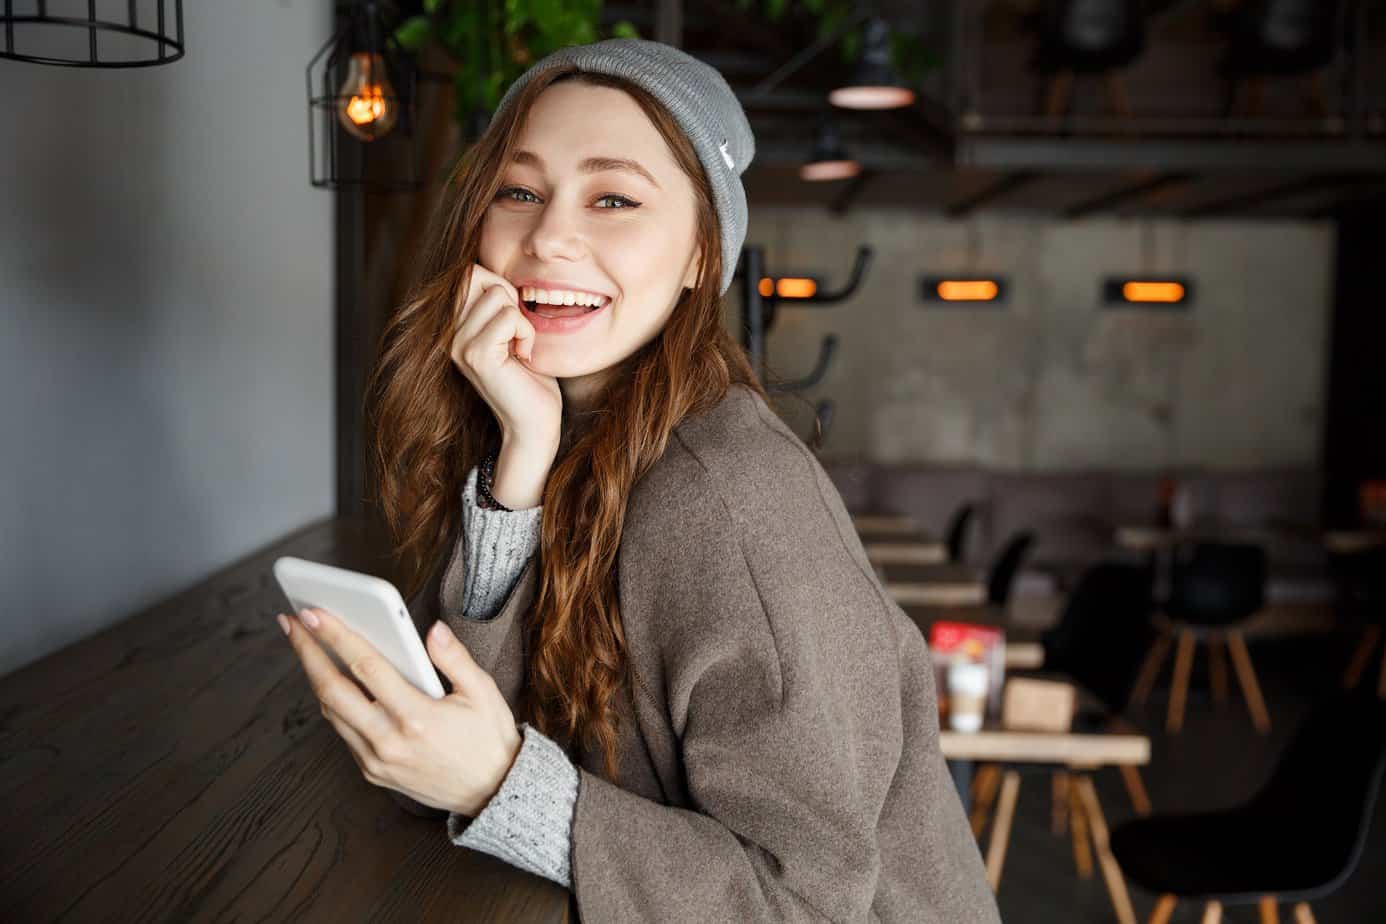 woman smiling with a smartphone in hand